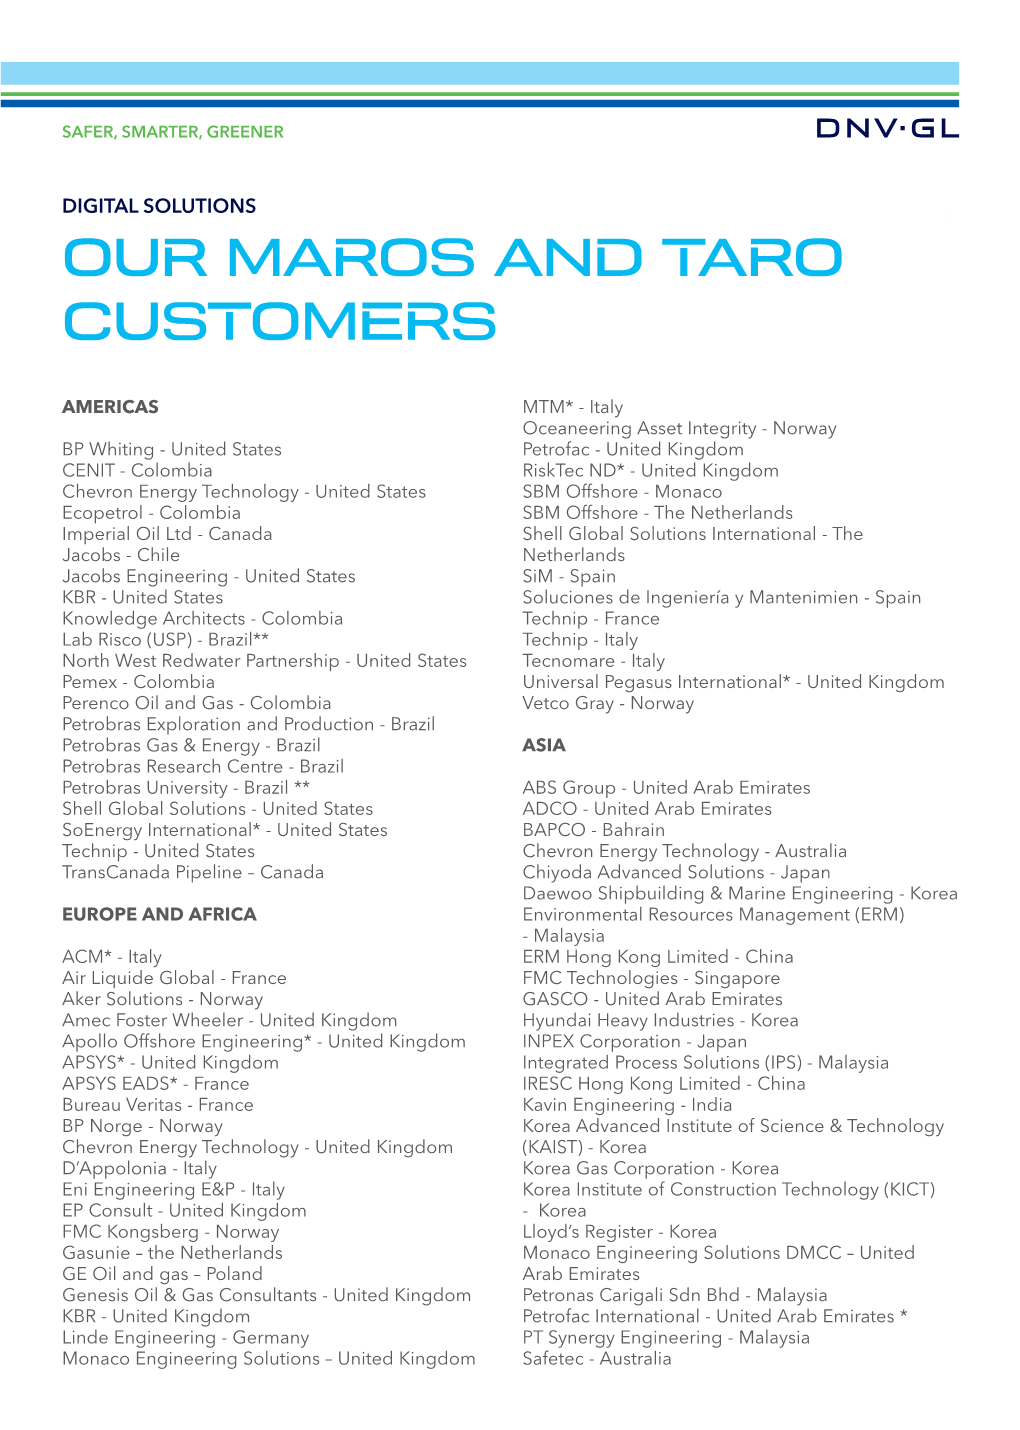 Our Maros and Taro Customers